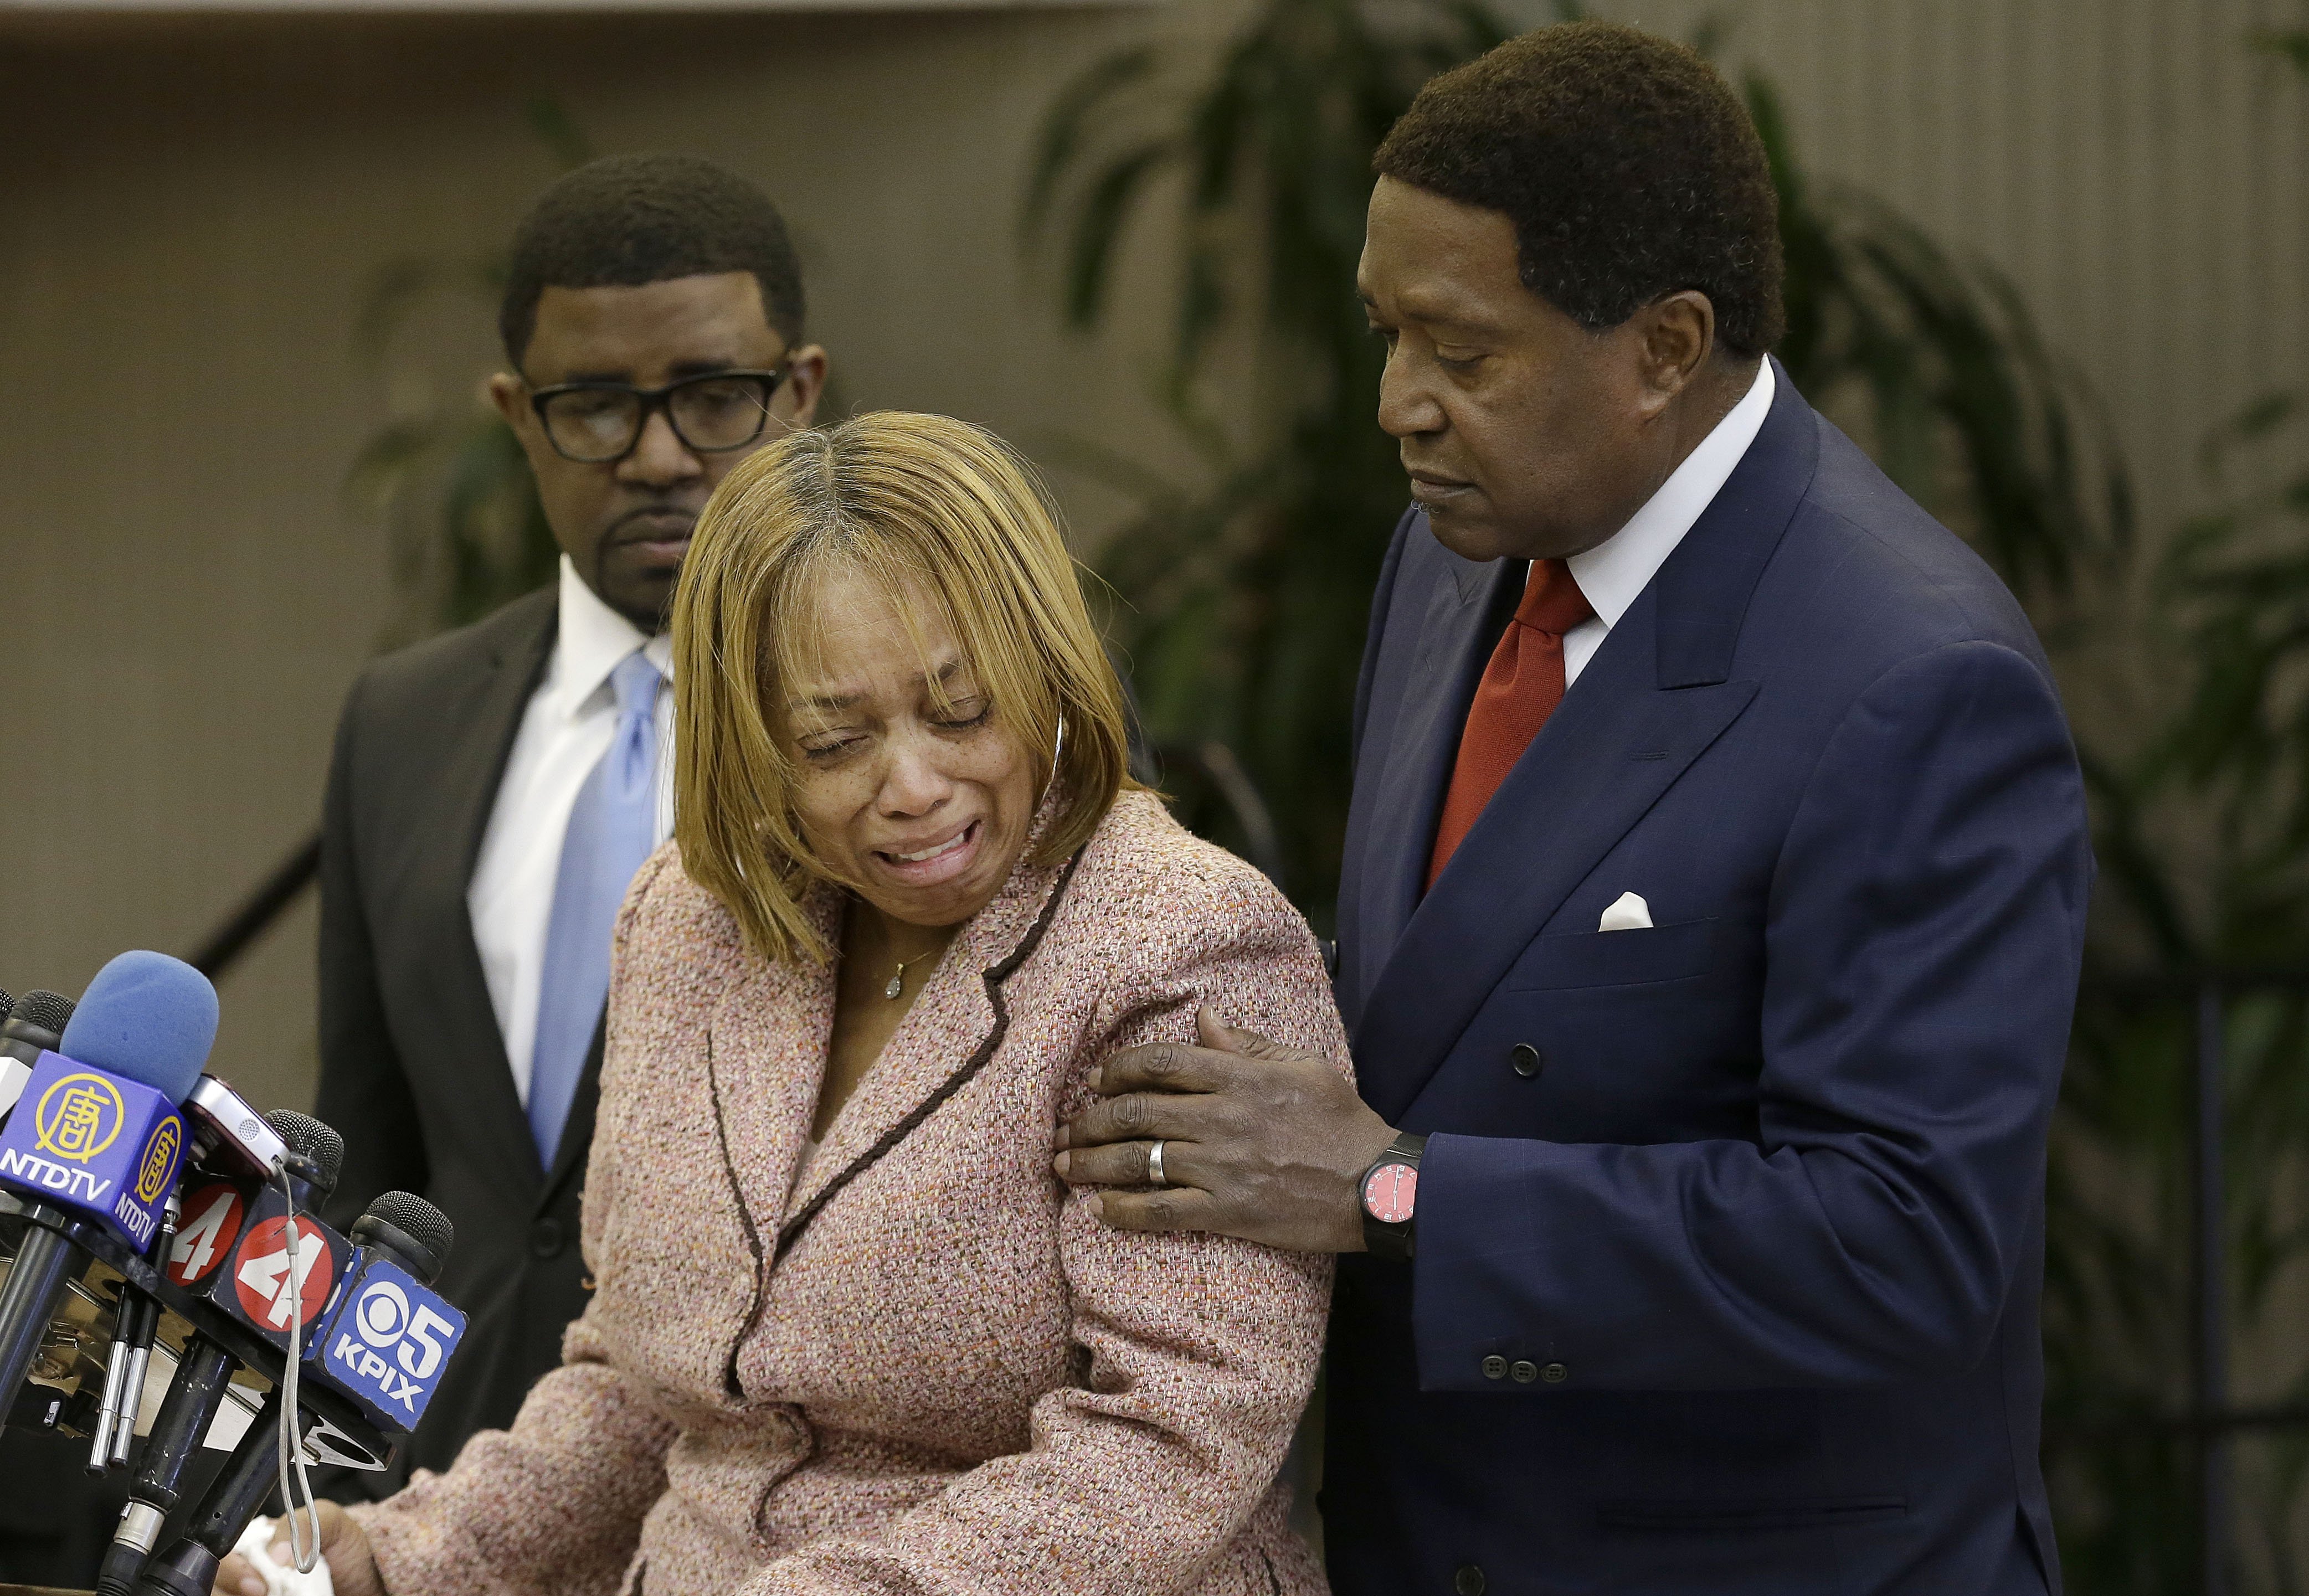 Attorney John Burris comforts Gwen Woods, the mother of Mario Woods, the suspect who was fatally shot by San Francisco Police last week, at a news conference at Southeast Community College in San Francisco on Dec. 11, 2015. (Jeff Chiu—AP)